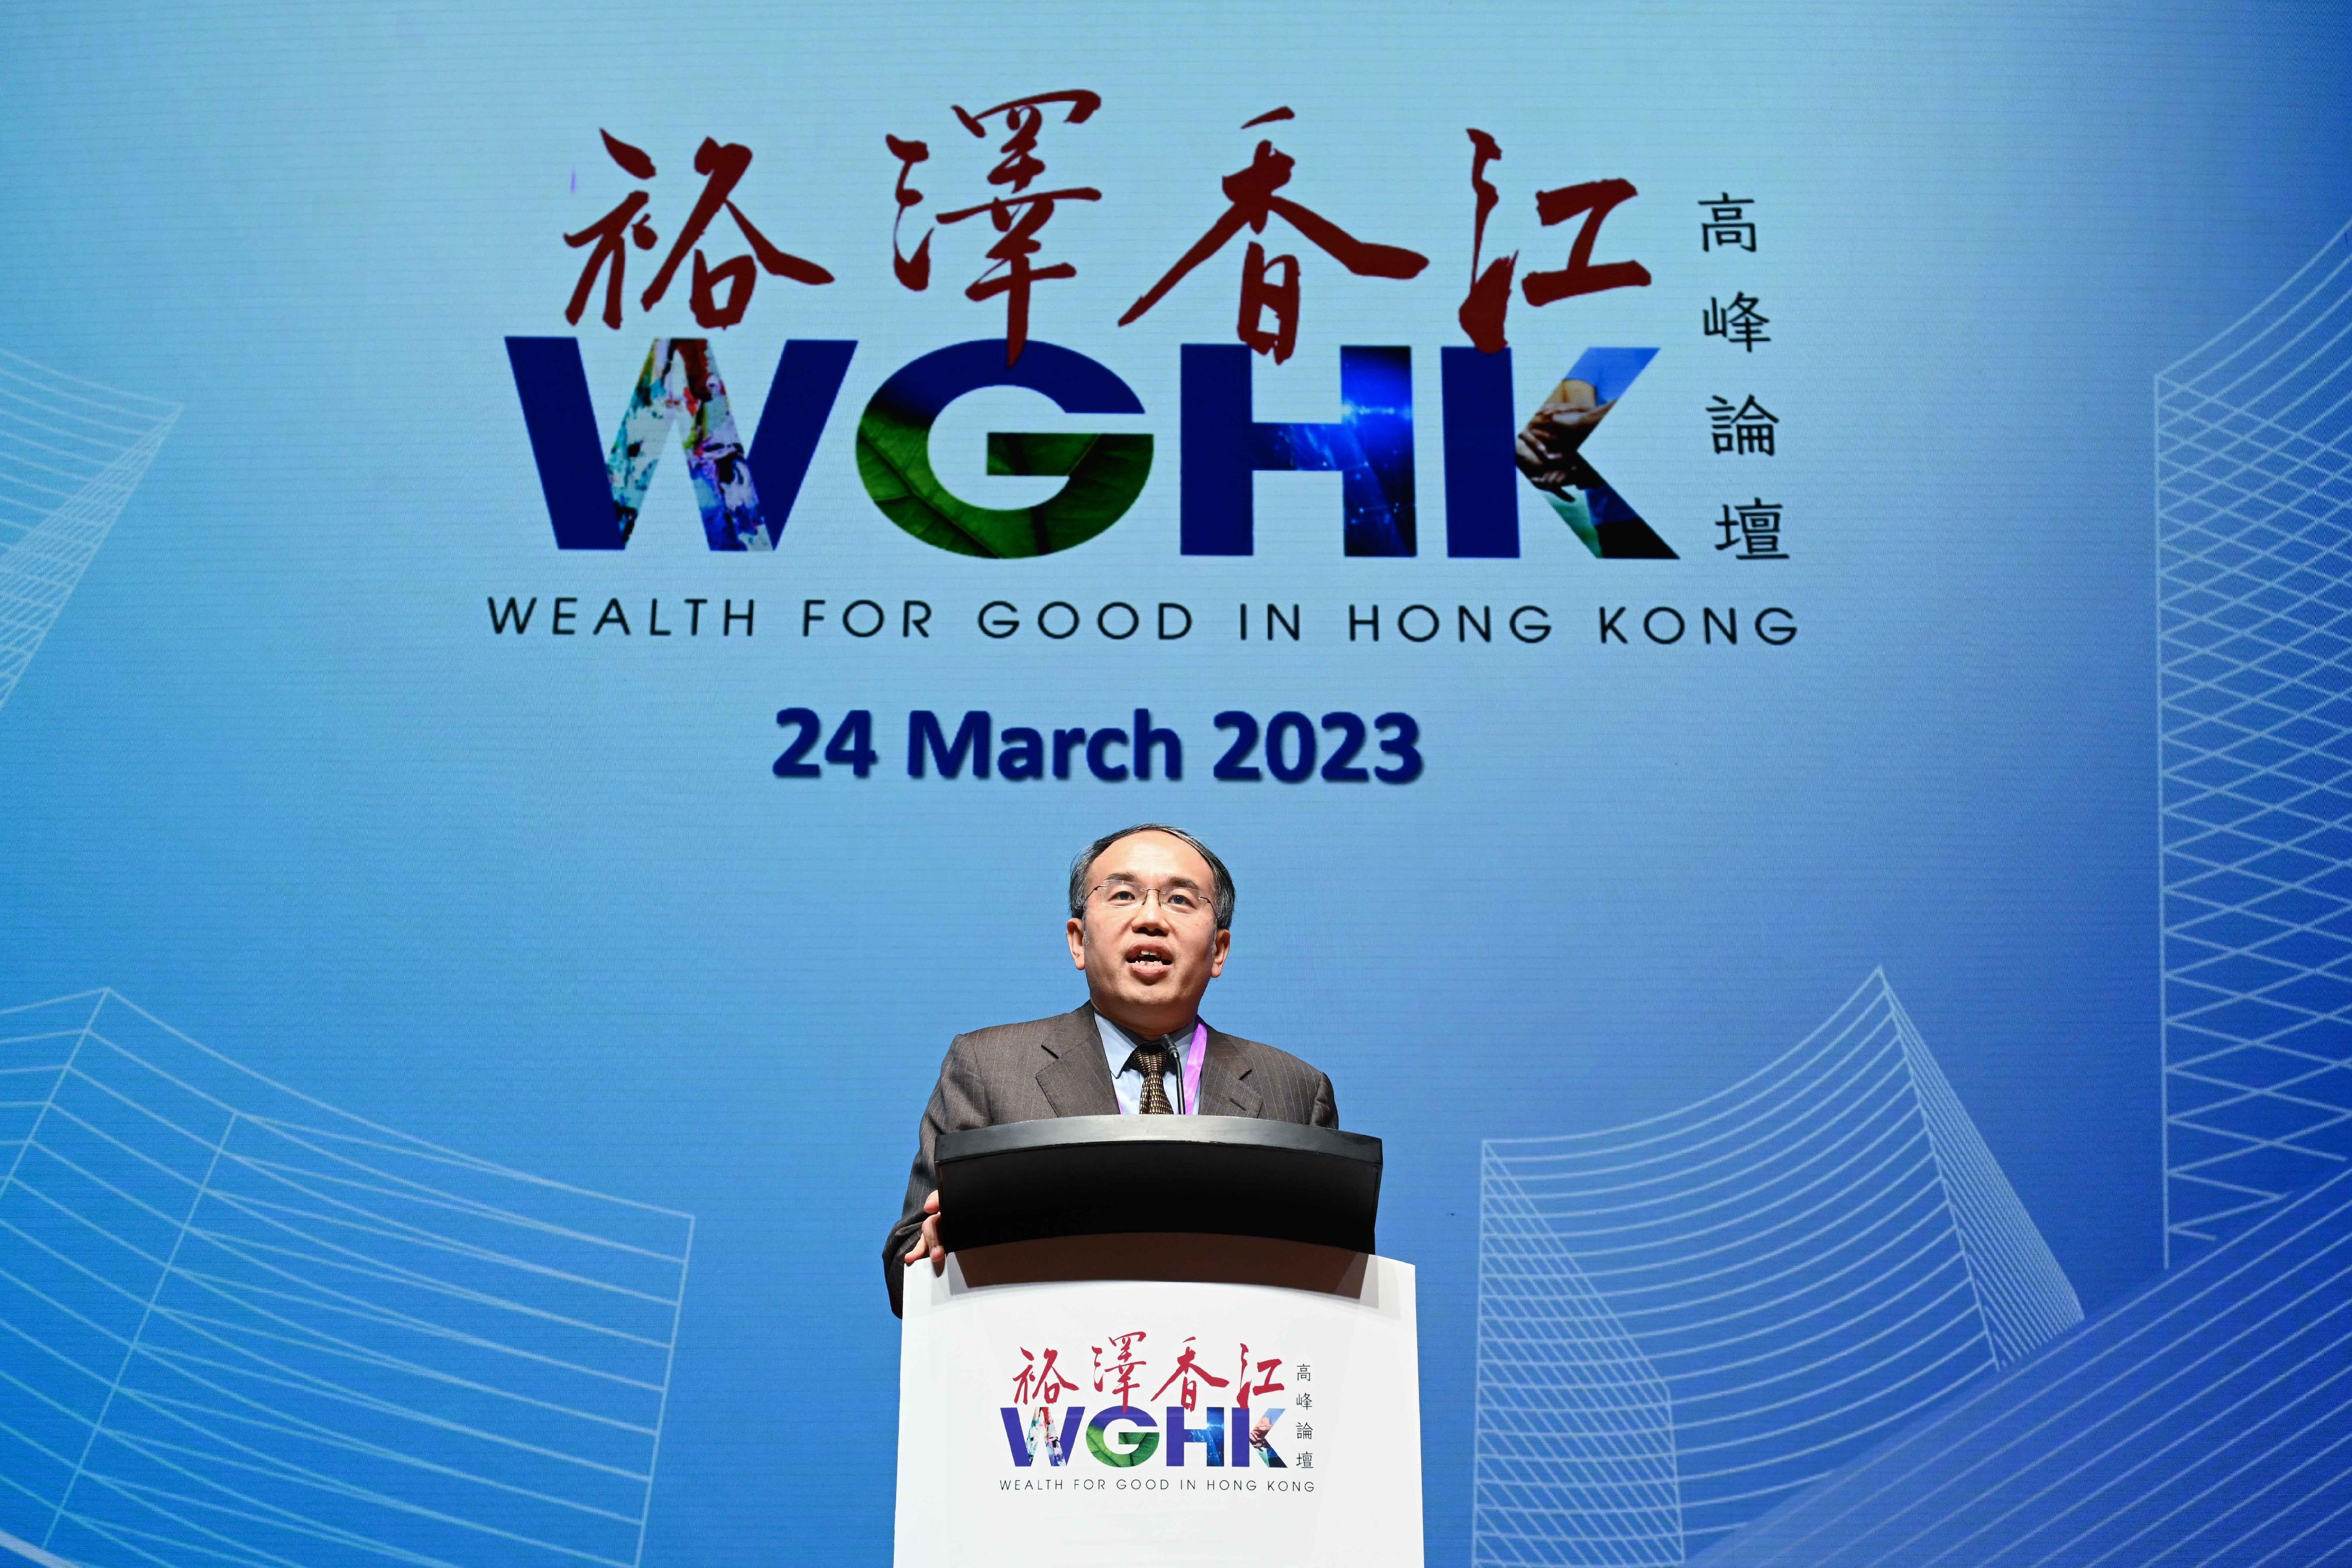 The Wealth for Good in Hong Kong Summit opening remarks were delivered today (March 24) by the Secretary for Financial Services and the Treasury, Mr Christopher Hui, highlighting new opportunities for global family offices to grow and thrive in Hong Kong, one of the world's leading asset and wealth management hubs.